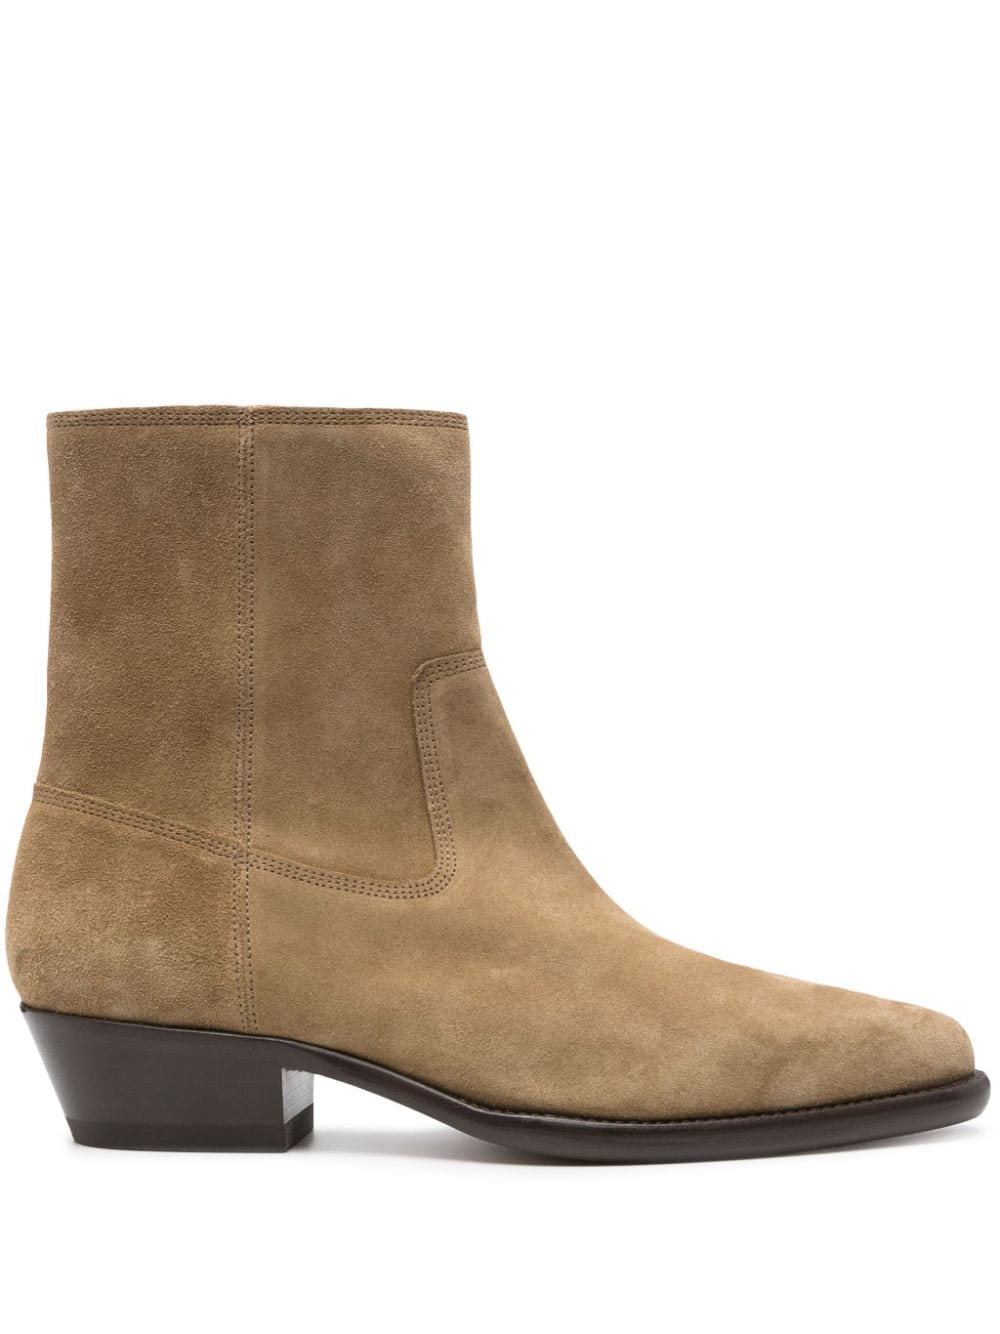 MARANT pointed-toe suede ankle boots - Neutrals von MARANT